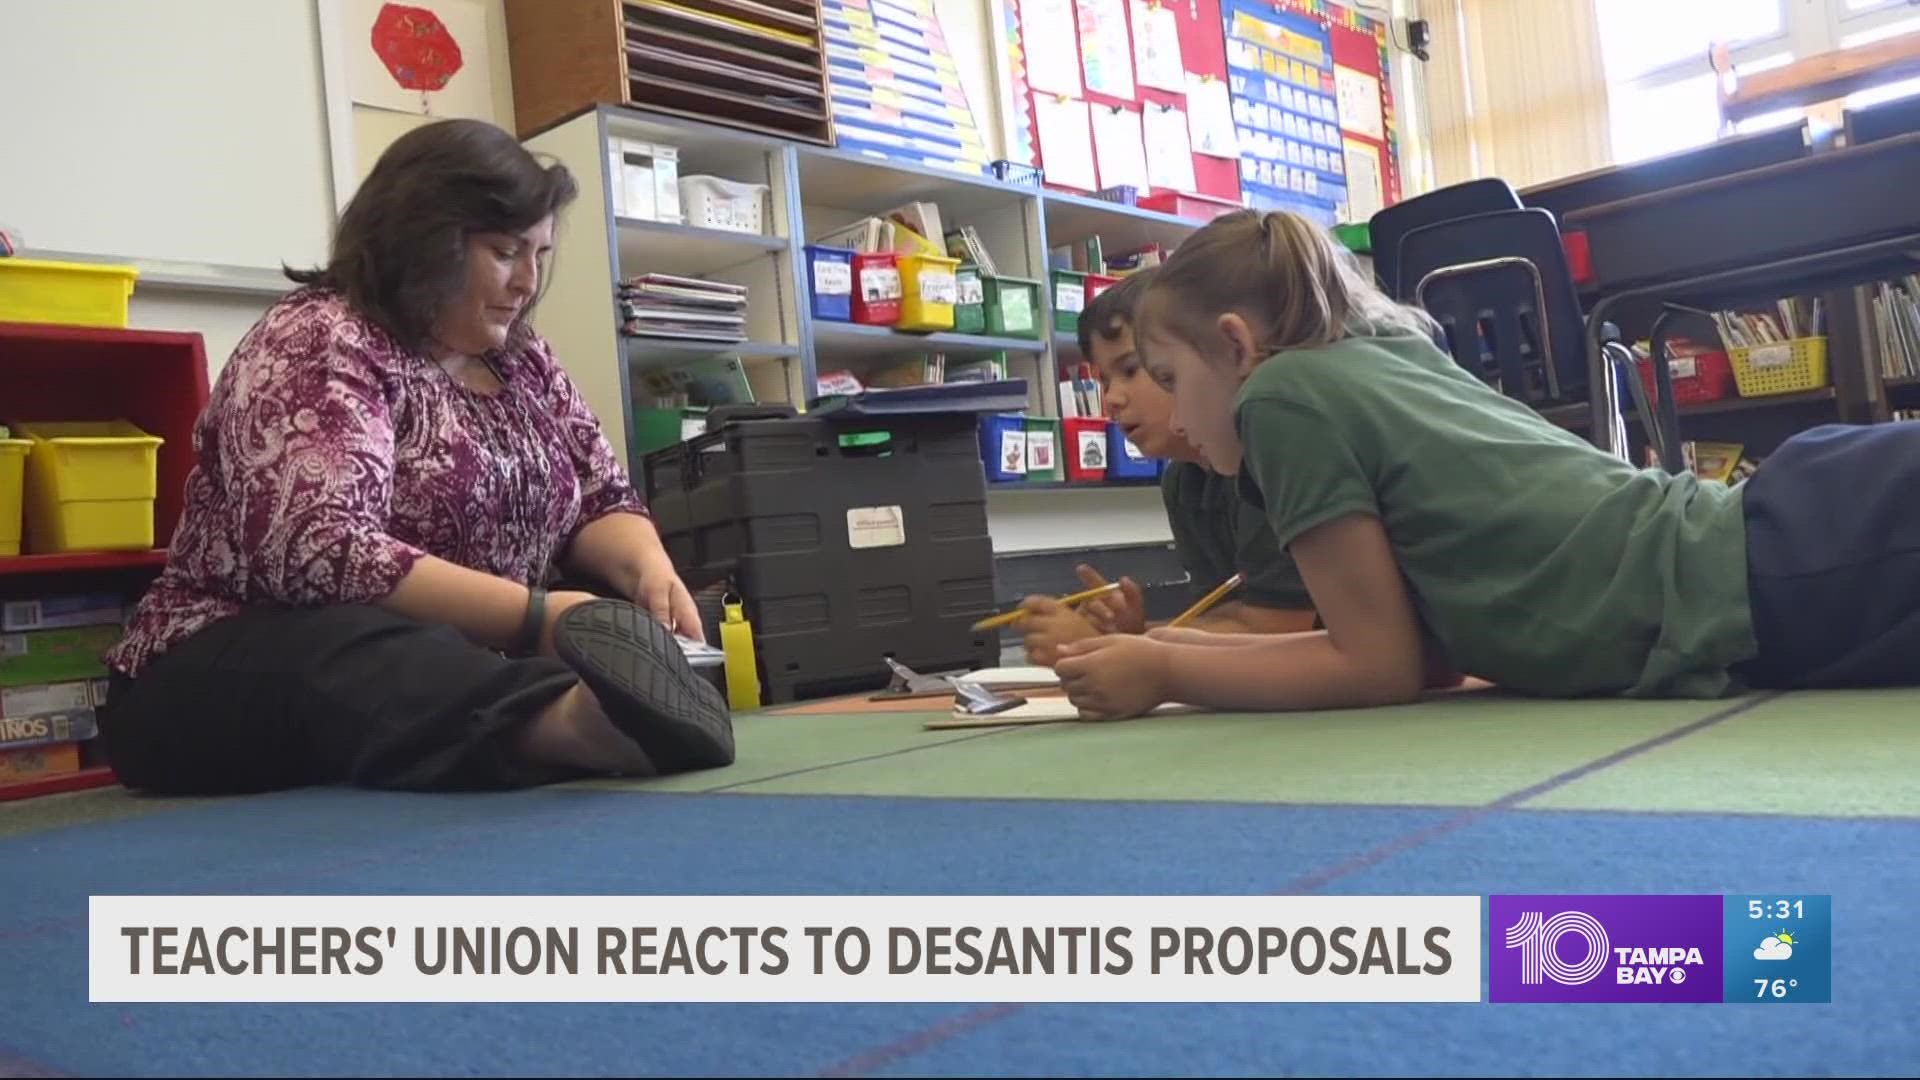 The announcement came as part of a promotion of $1 billion in teacher pay raises.